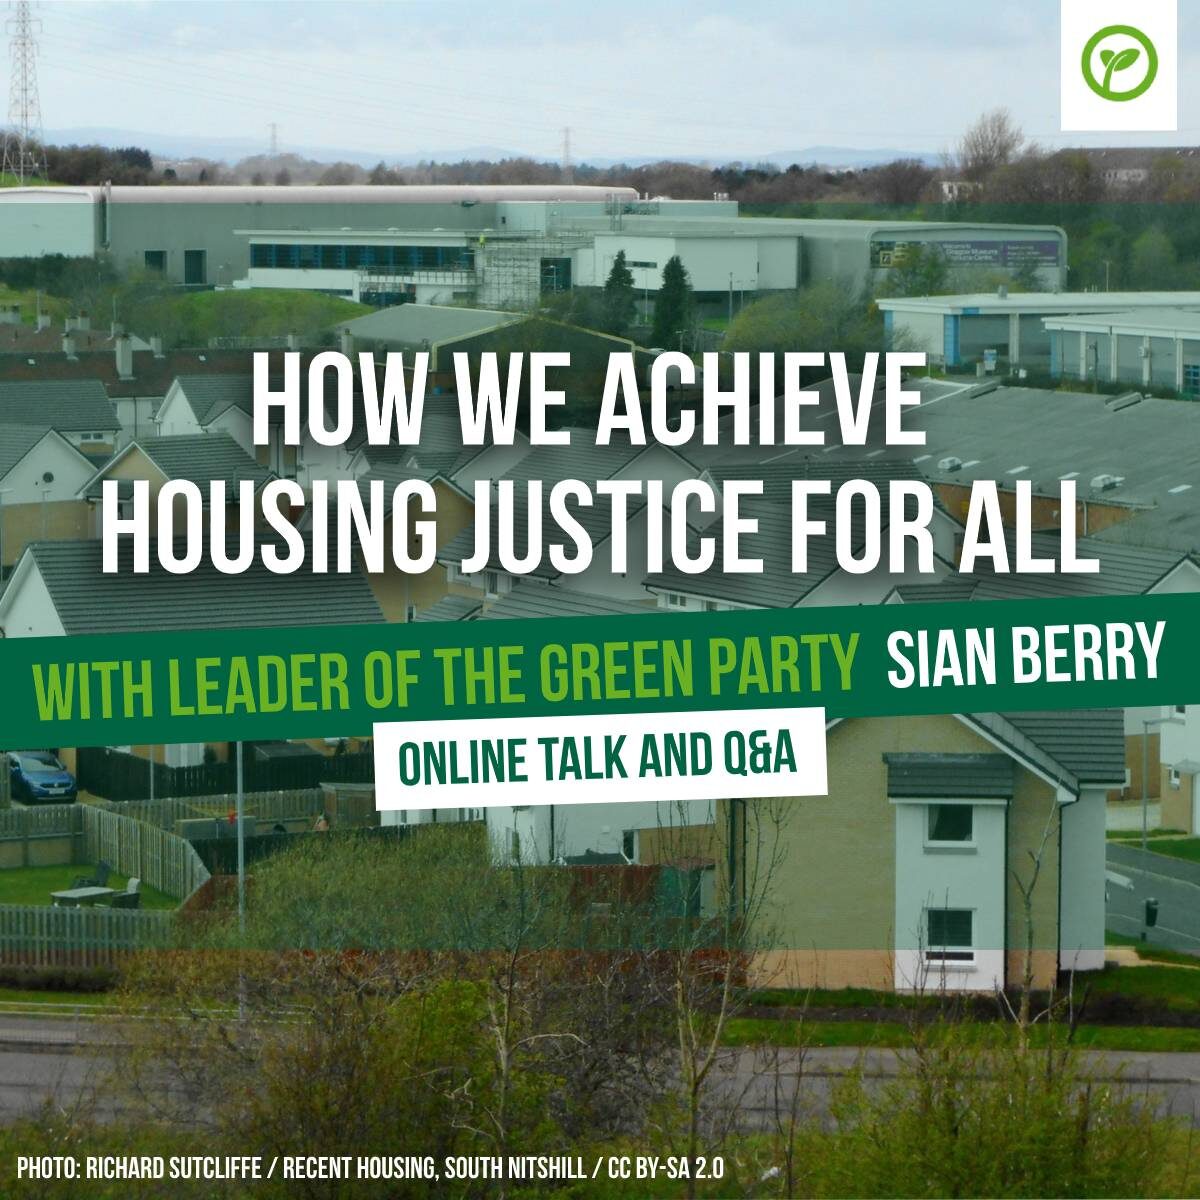 How we achieve housing justice for all with leader of the green party Sian Berry - Online Talk and Q&A. Photo: Richard Sutcliffe / Recent housing, South Nitshill / CC BY-SA 2.0